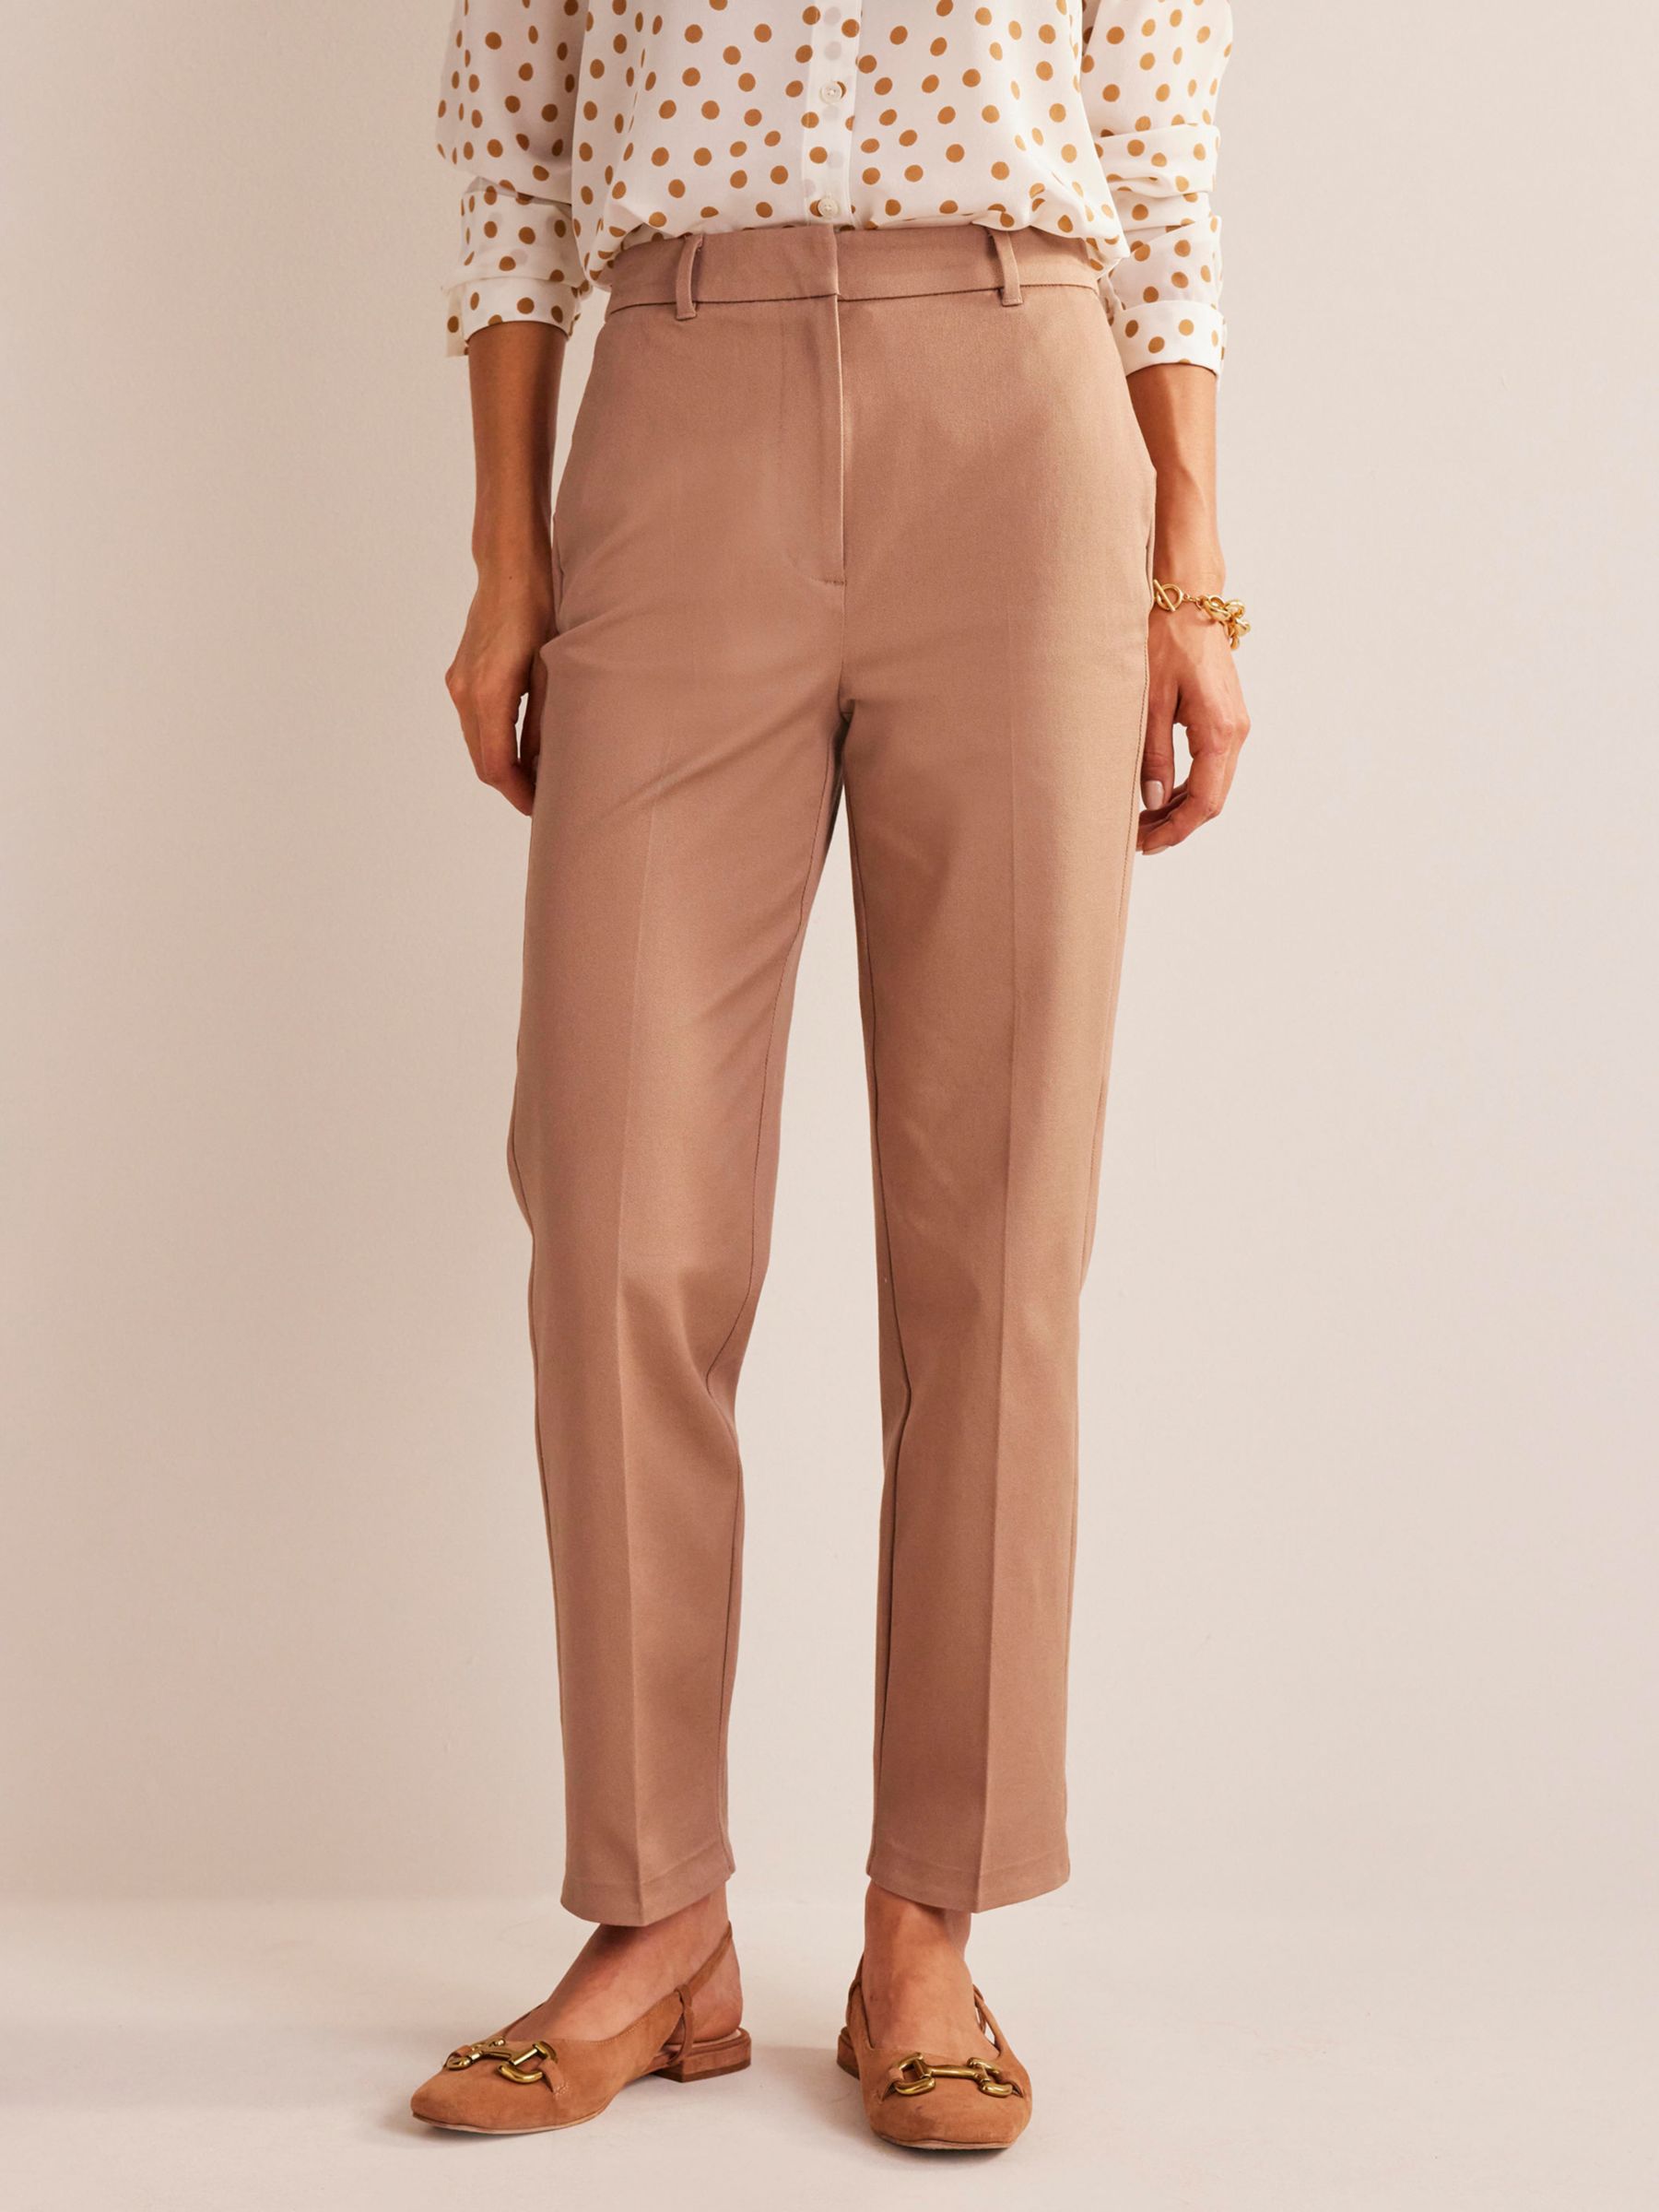 LIMITED COLLECTION Curve Camel Brown Stretch Ribbed Leggings